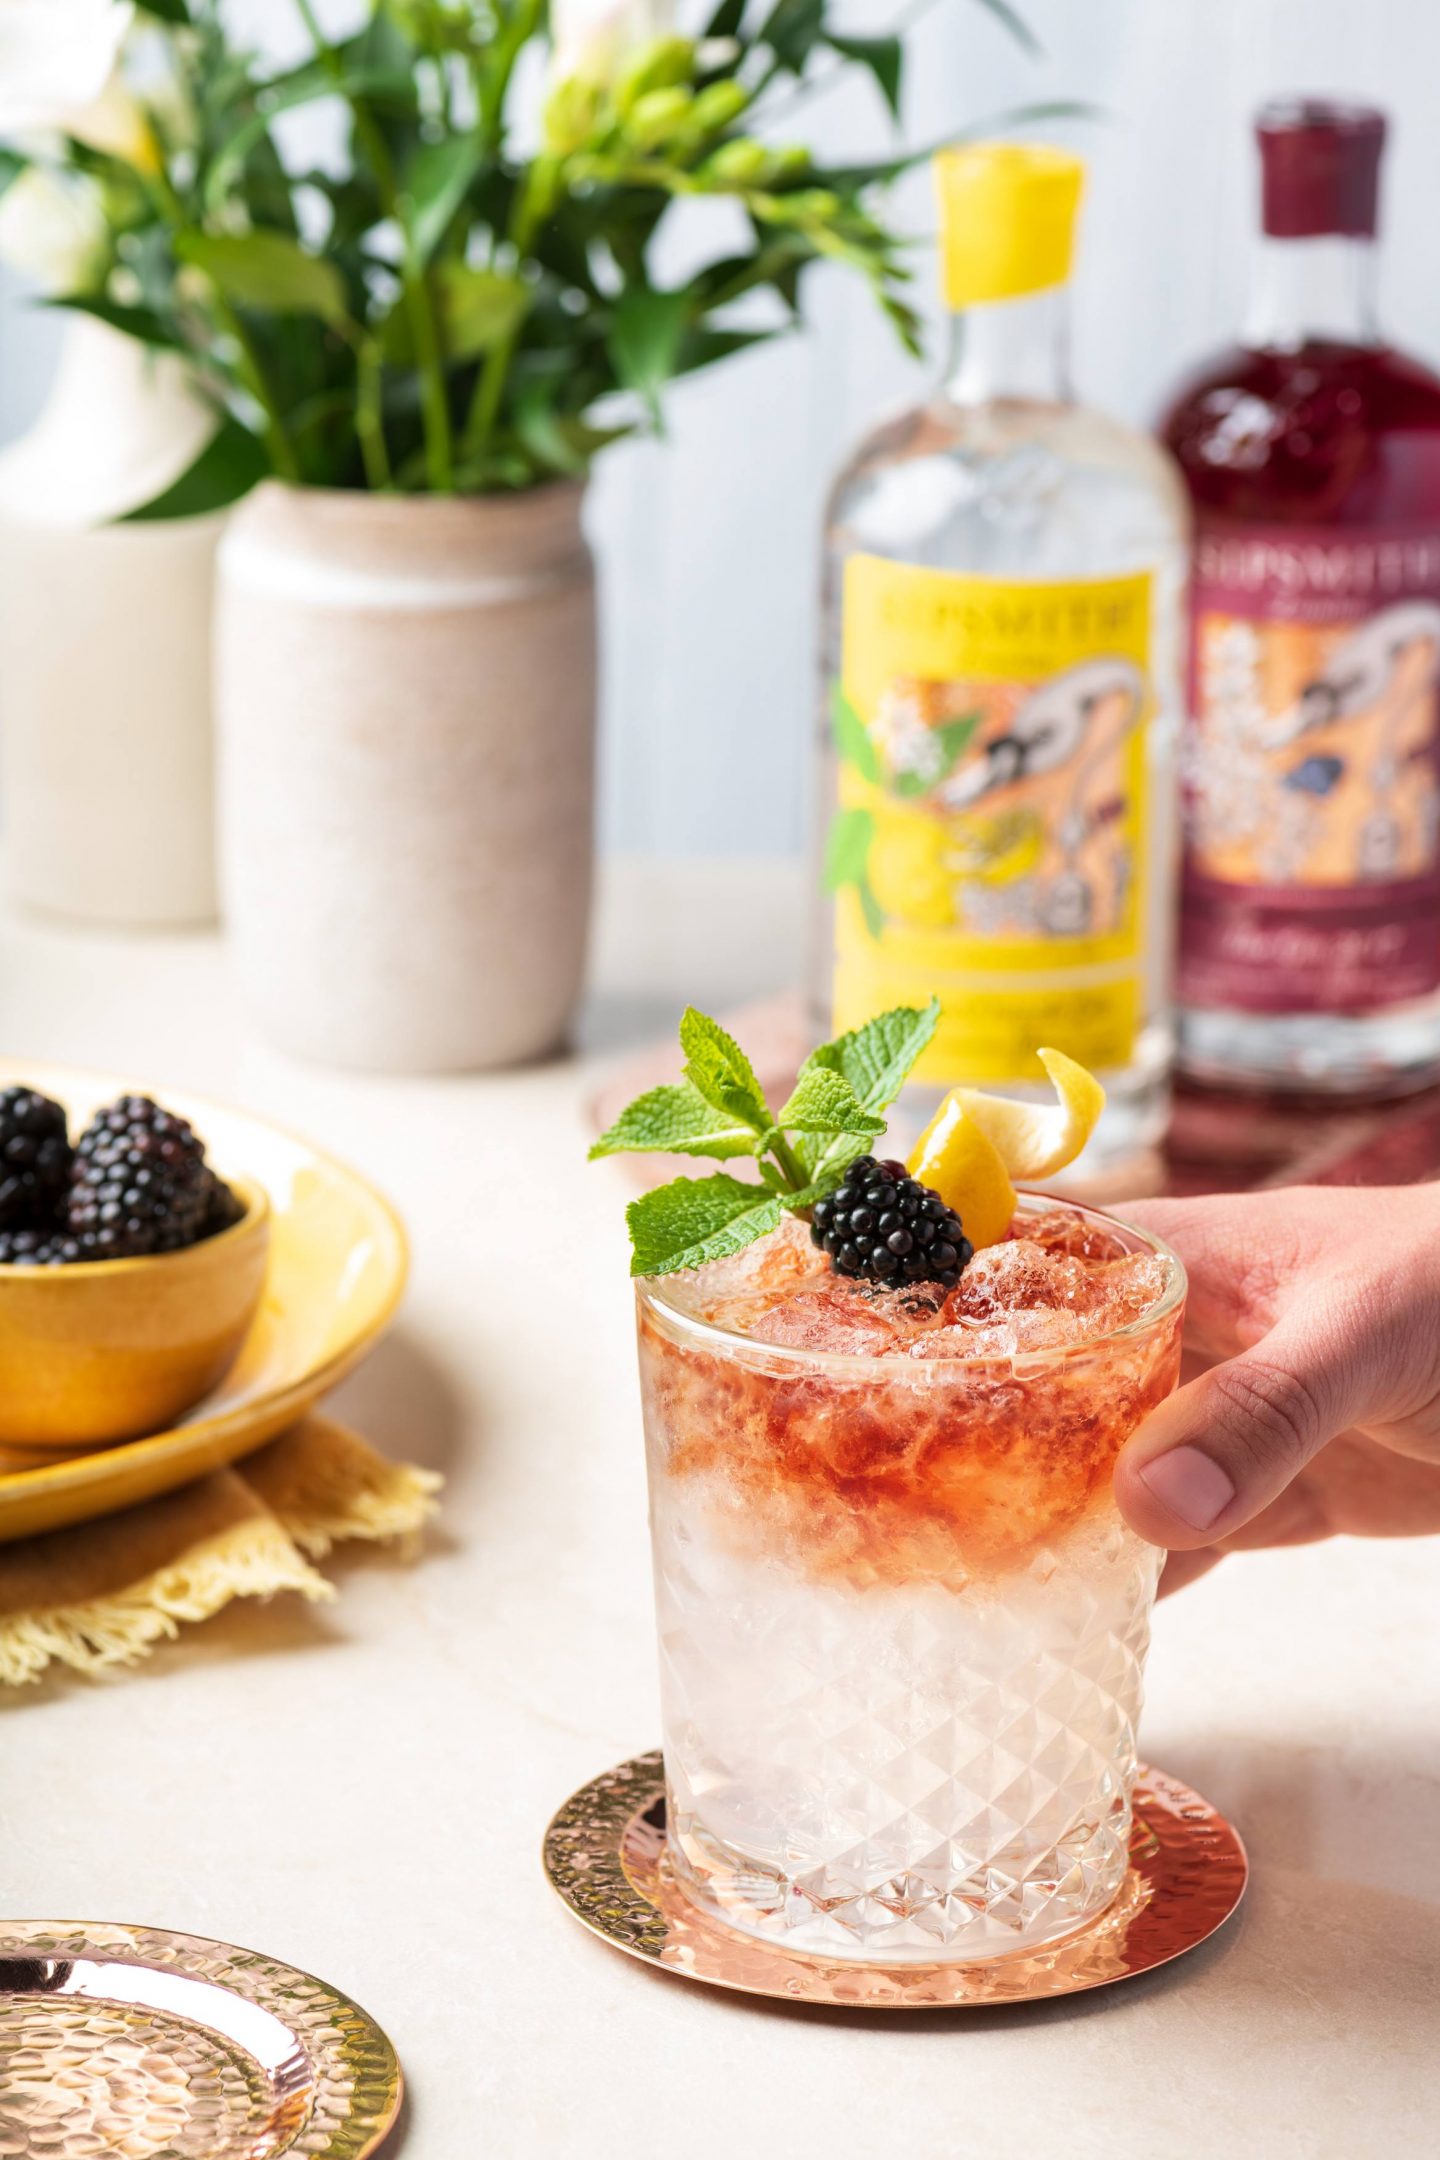 Shop Gin | Sipsmith | Delivery Sloe Gin Gin Gin |